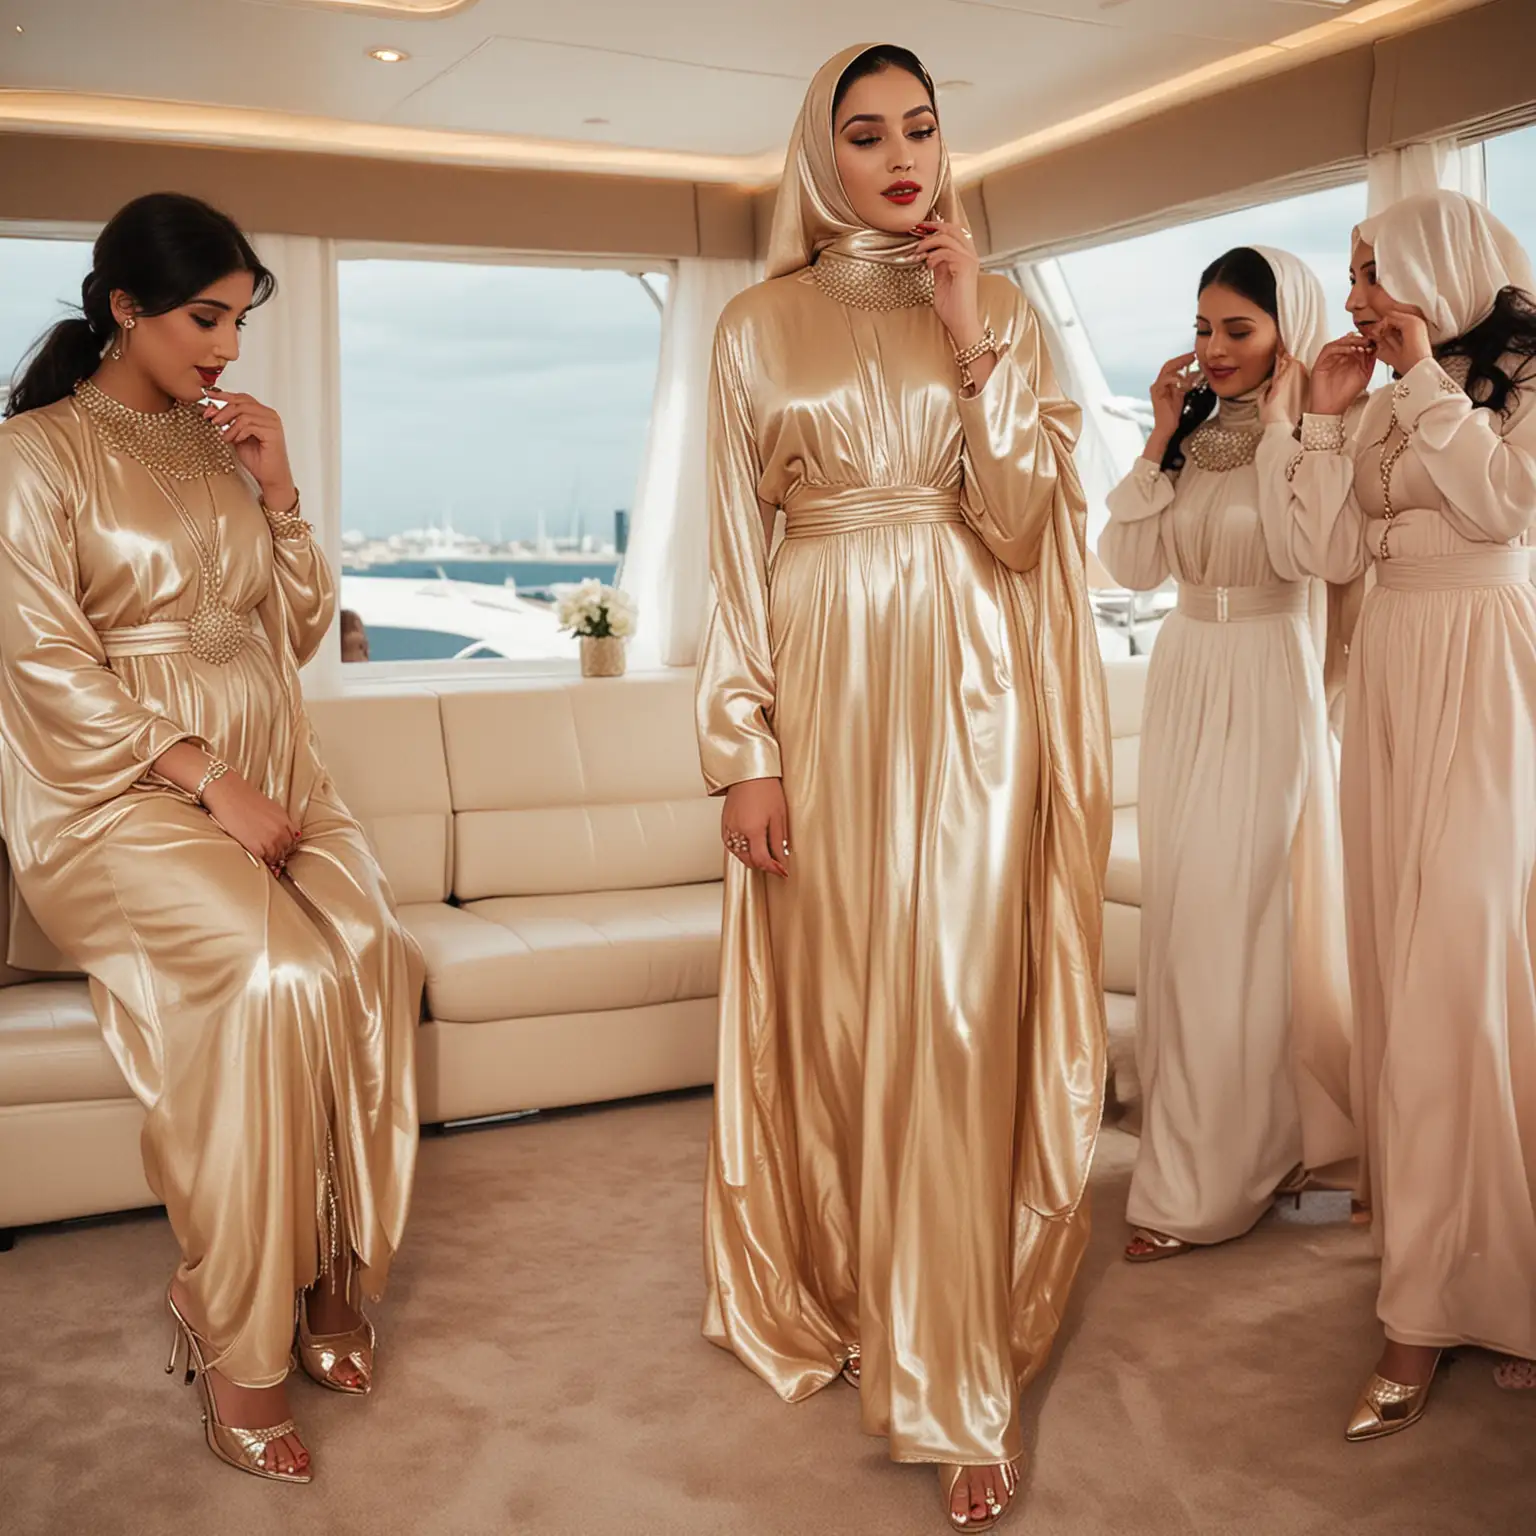 Luxurious HinduArab Wedding Ceremony on Yacht Glamorous Bride and Friends Admiring Louboutinstyle Heels